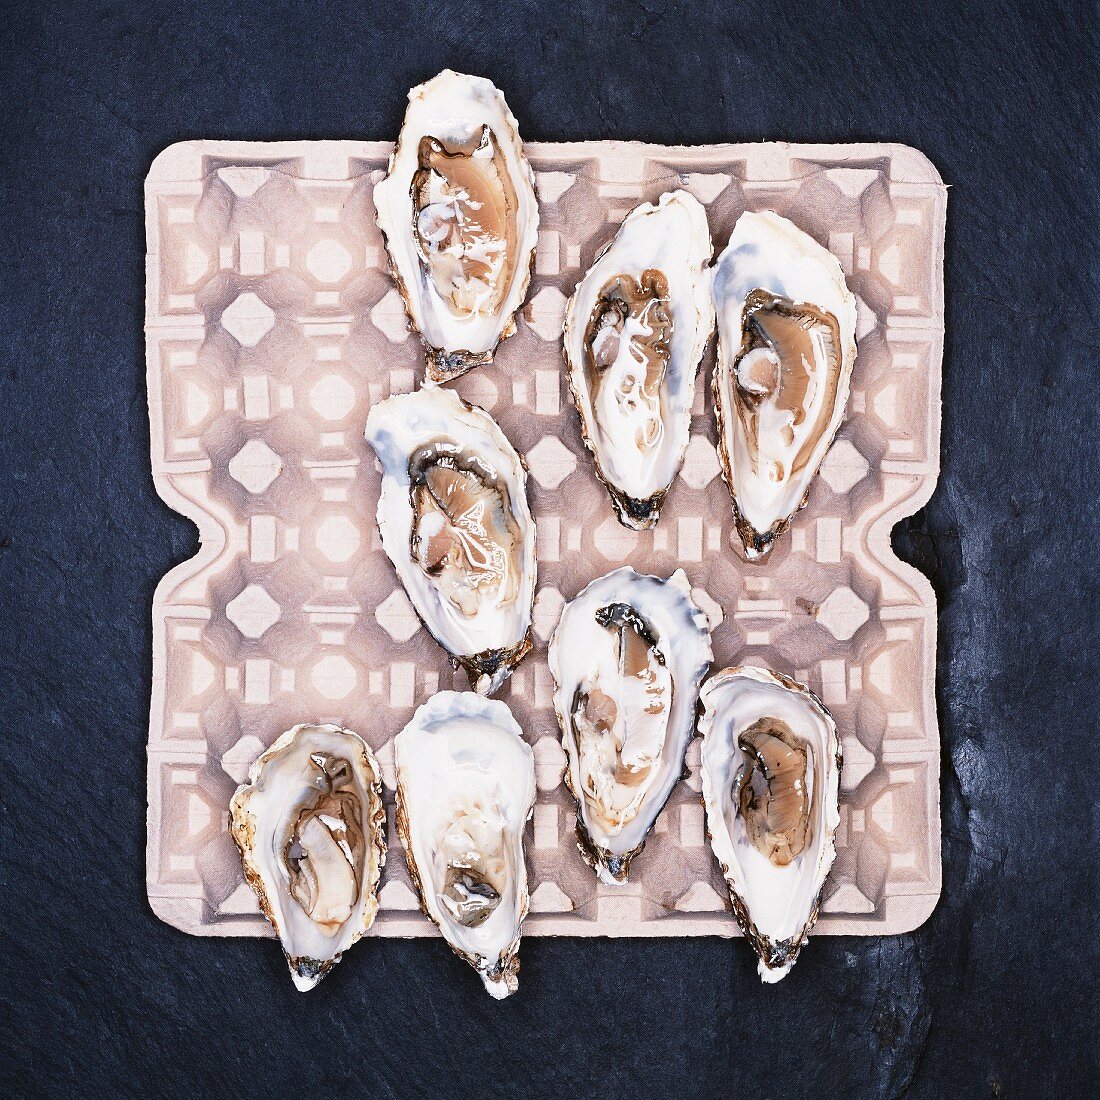 Opened oysters on an egg box